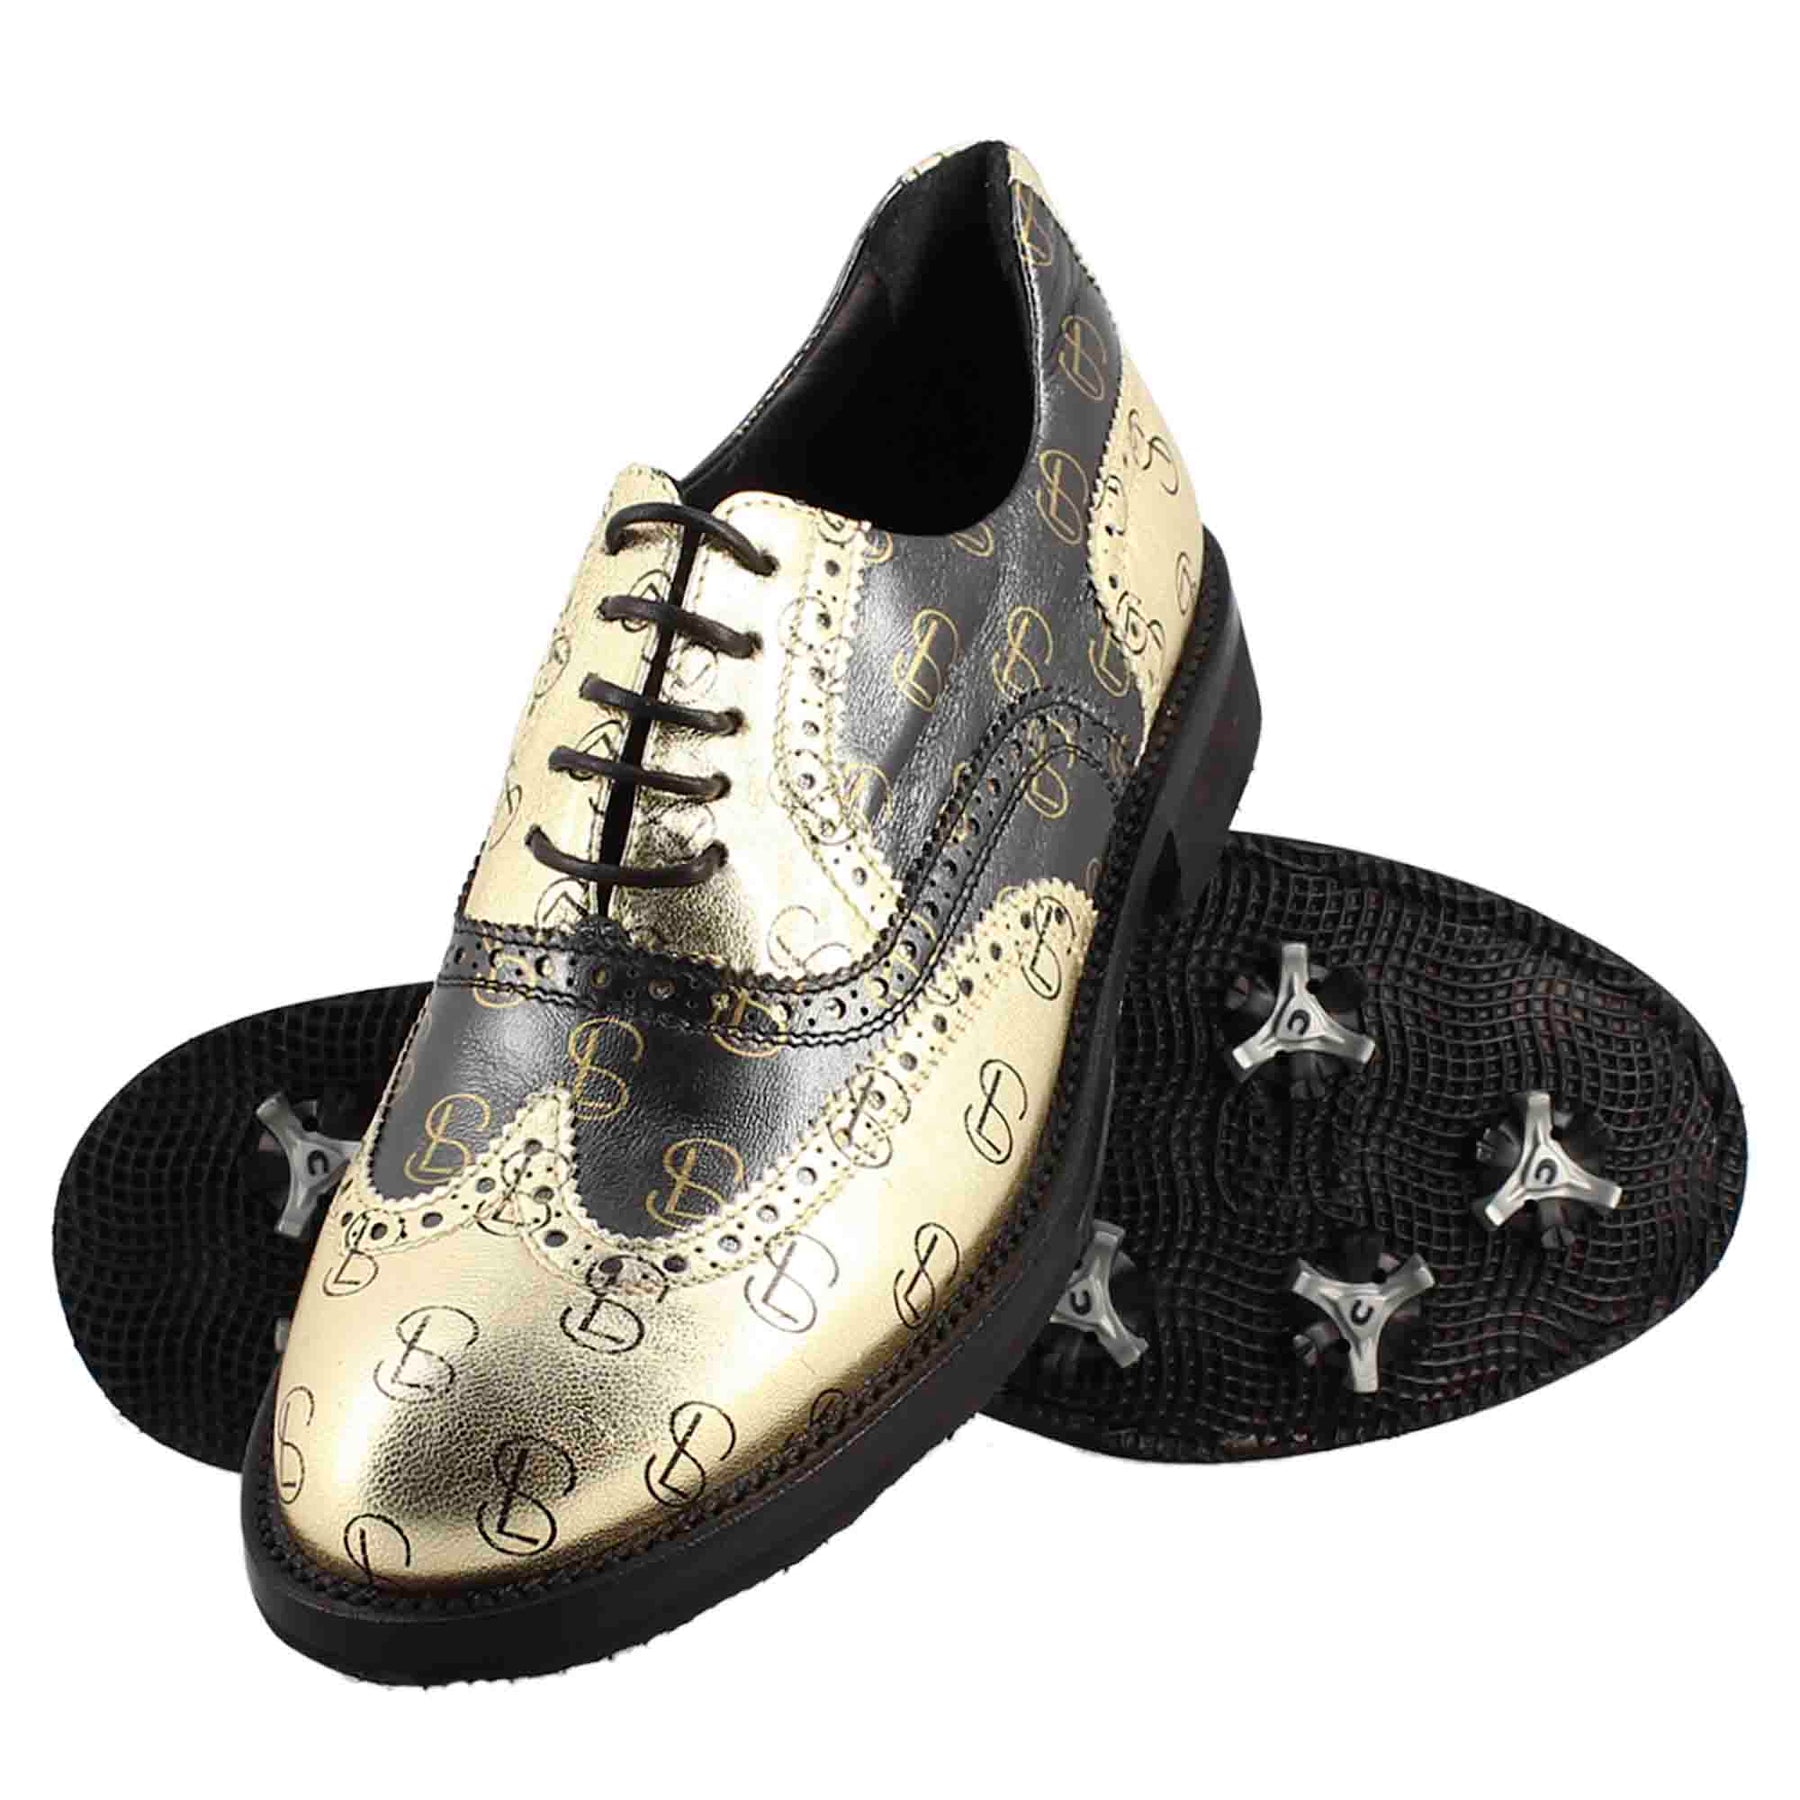 Women's two-tone black and gold full-grain leather golf shoes